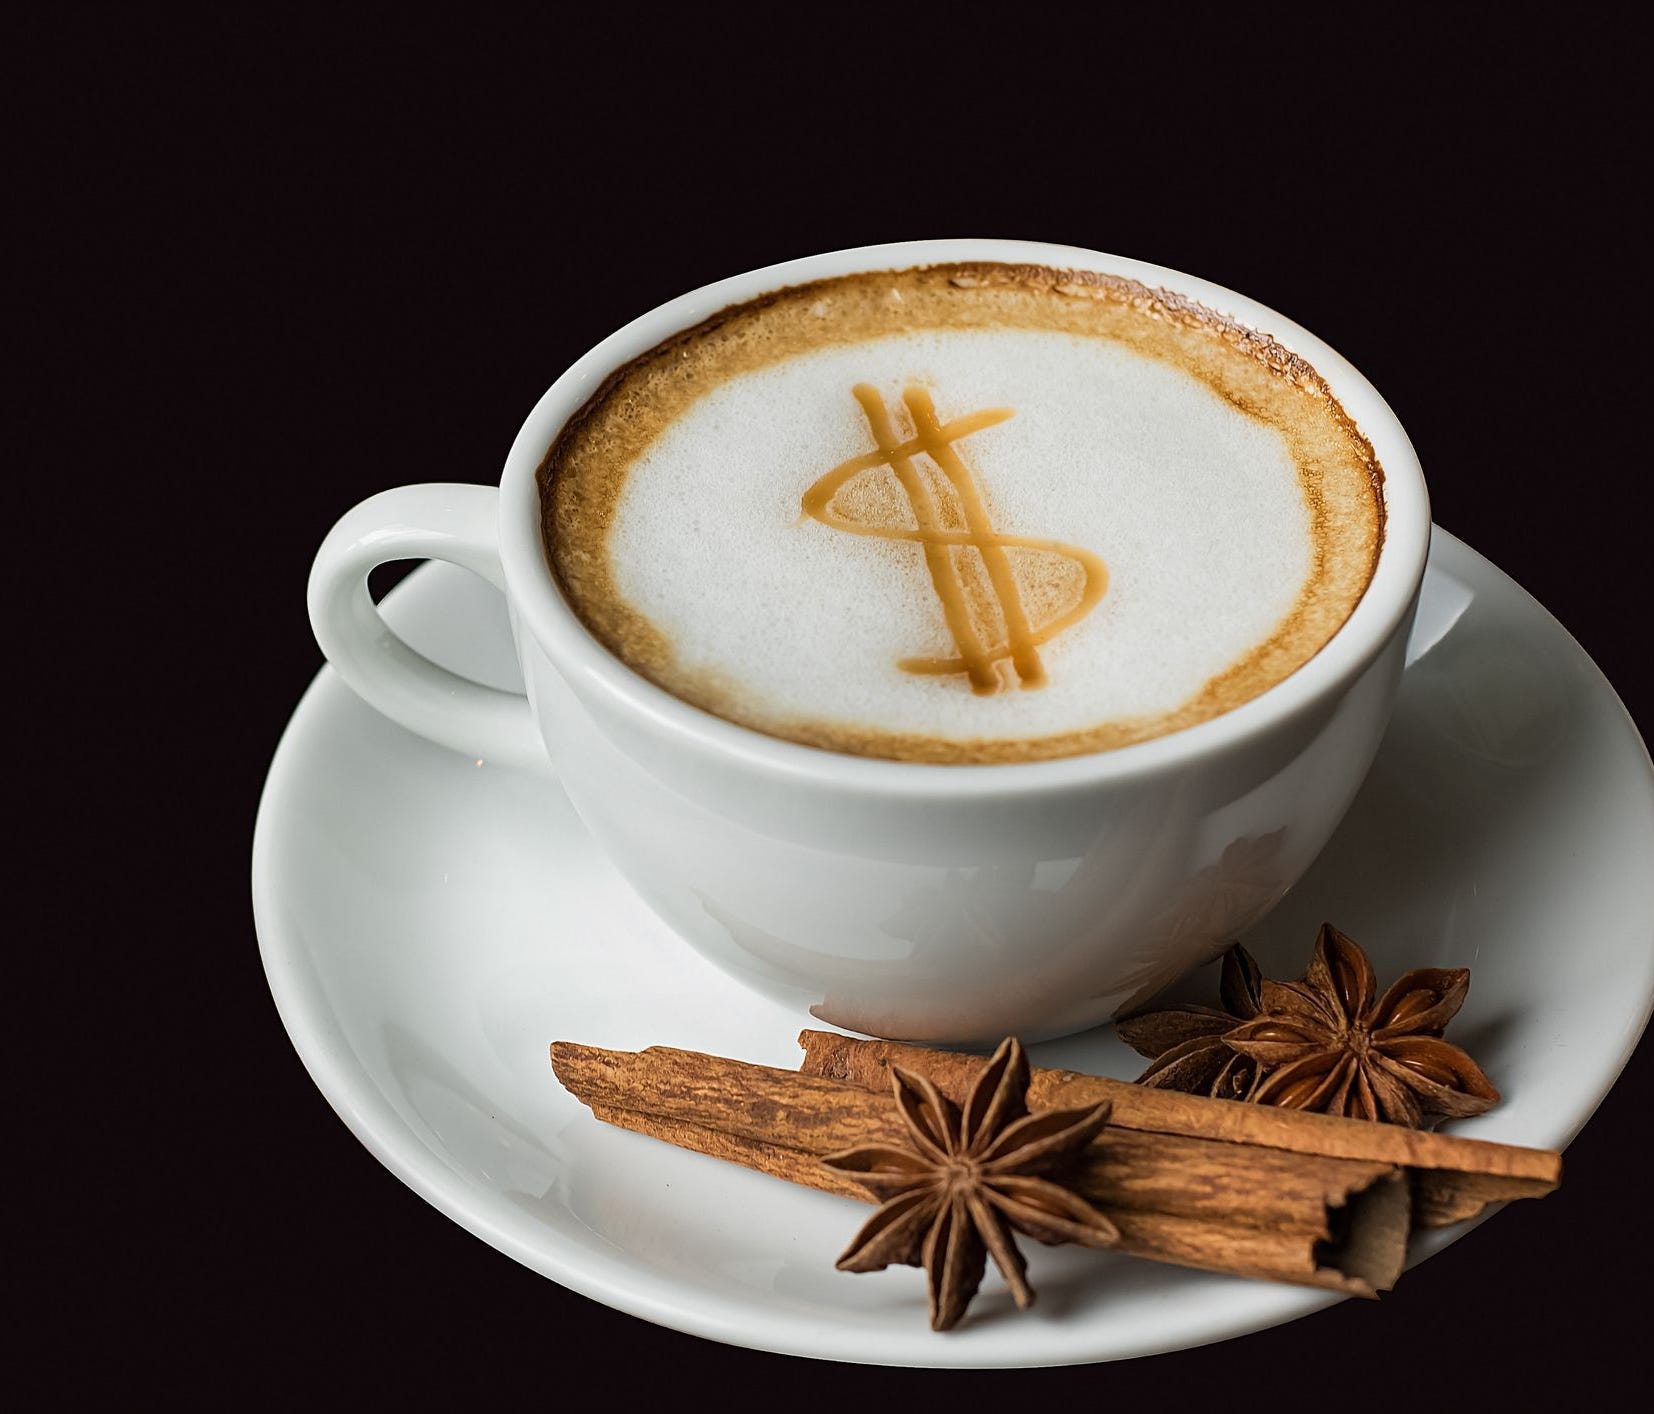 The cost of a cup of coffee or other seemingly small outlays can exert a tremendous financial drain over time.